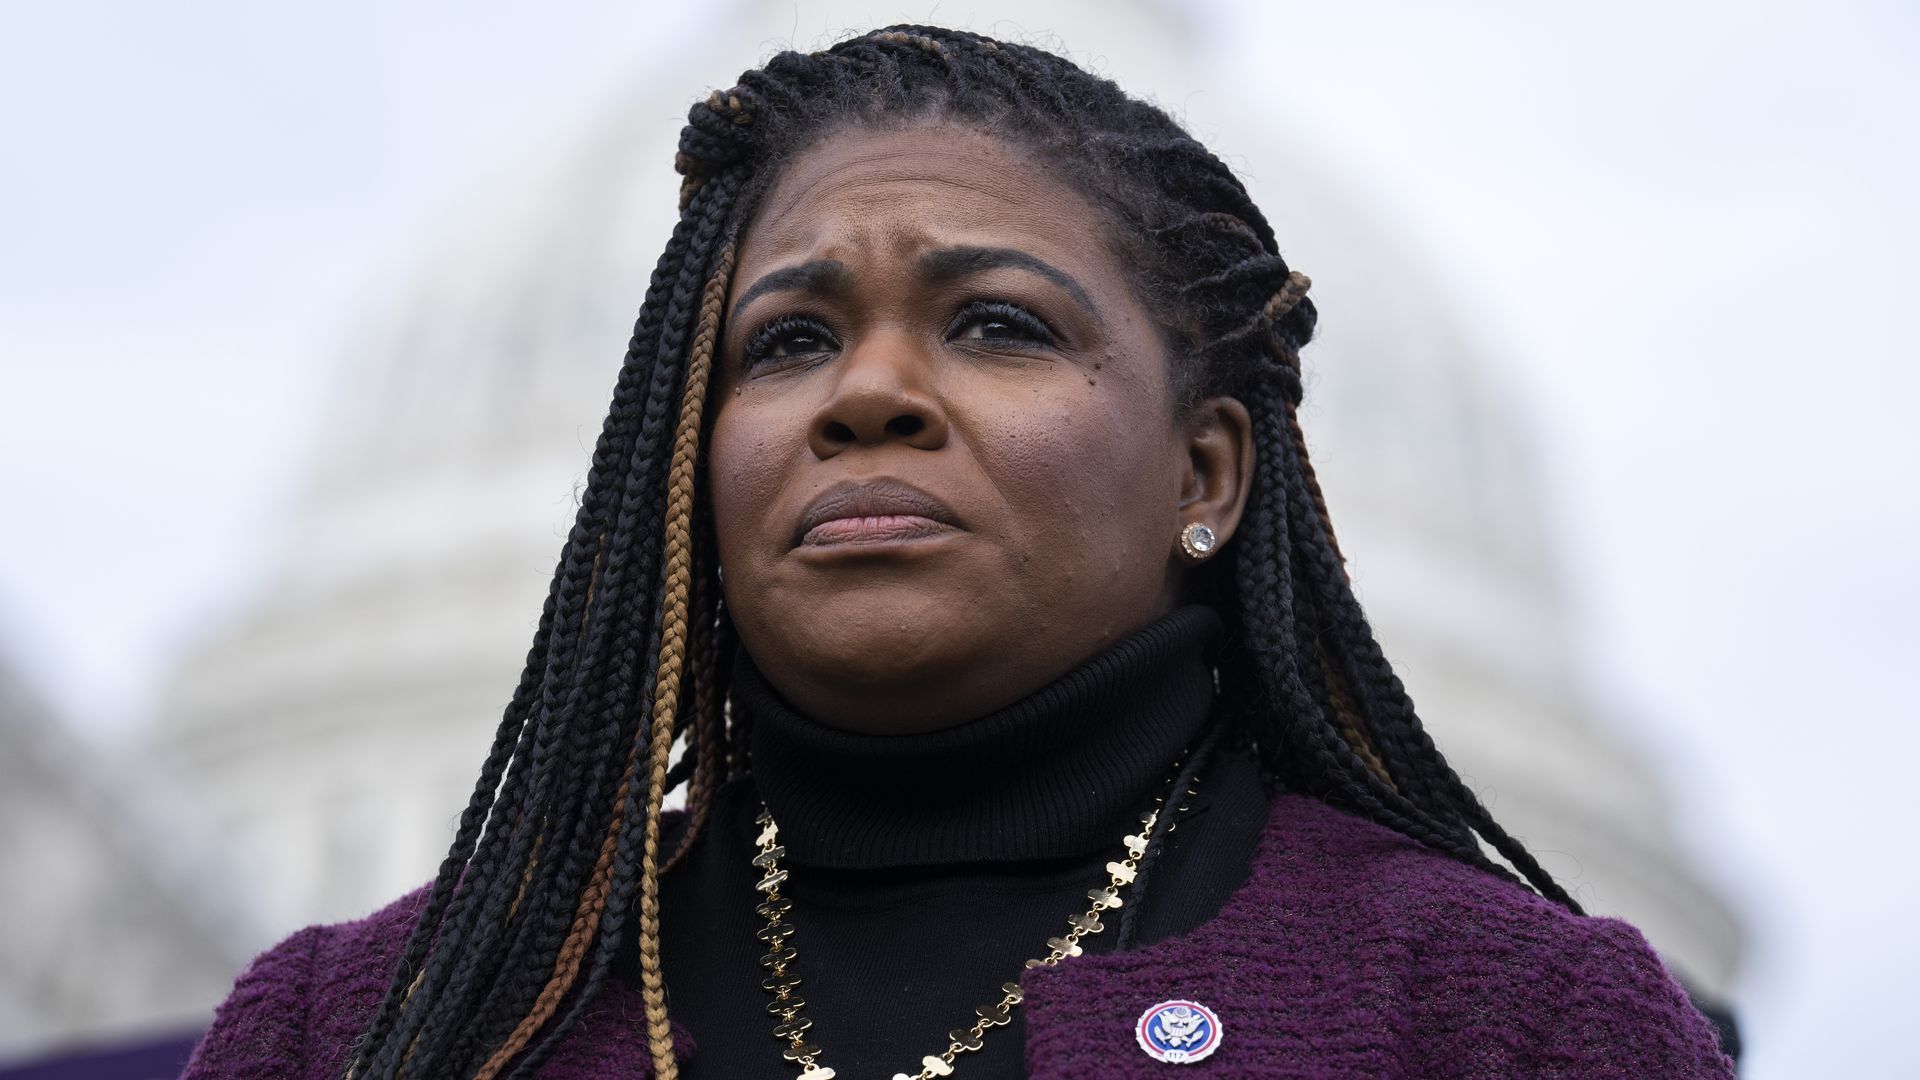 Rep. Cori Bush is seen standing in front of the U.S. Capitol.